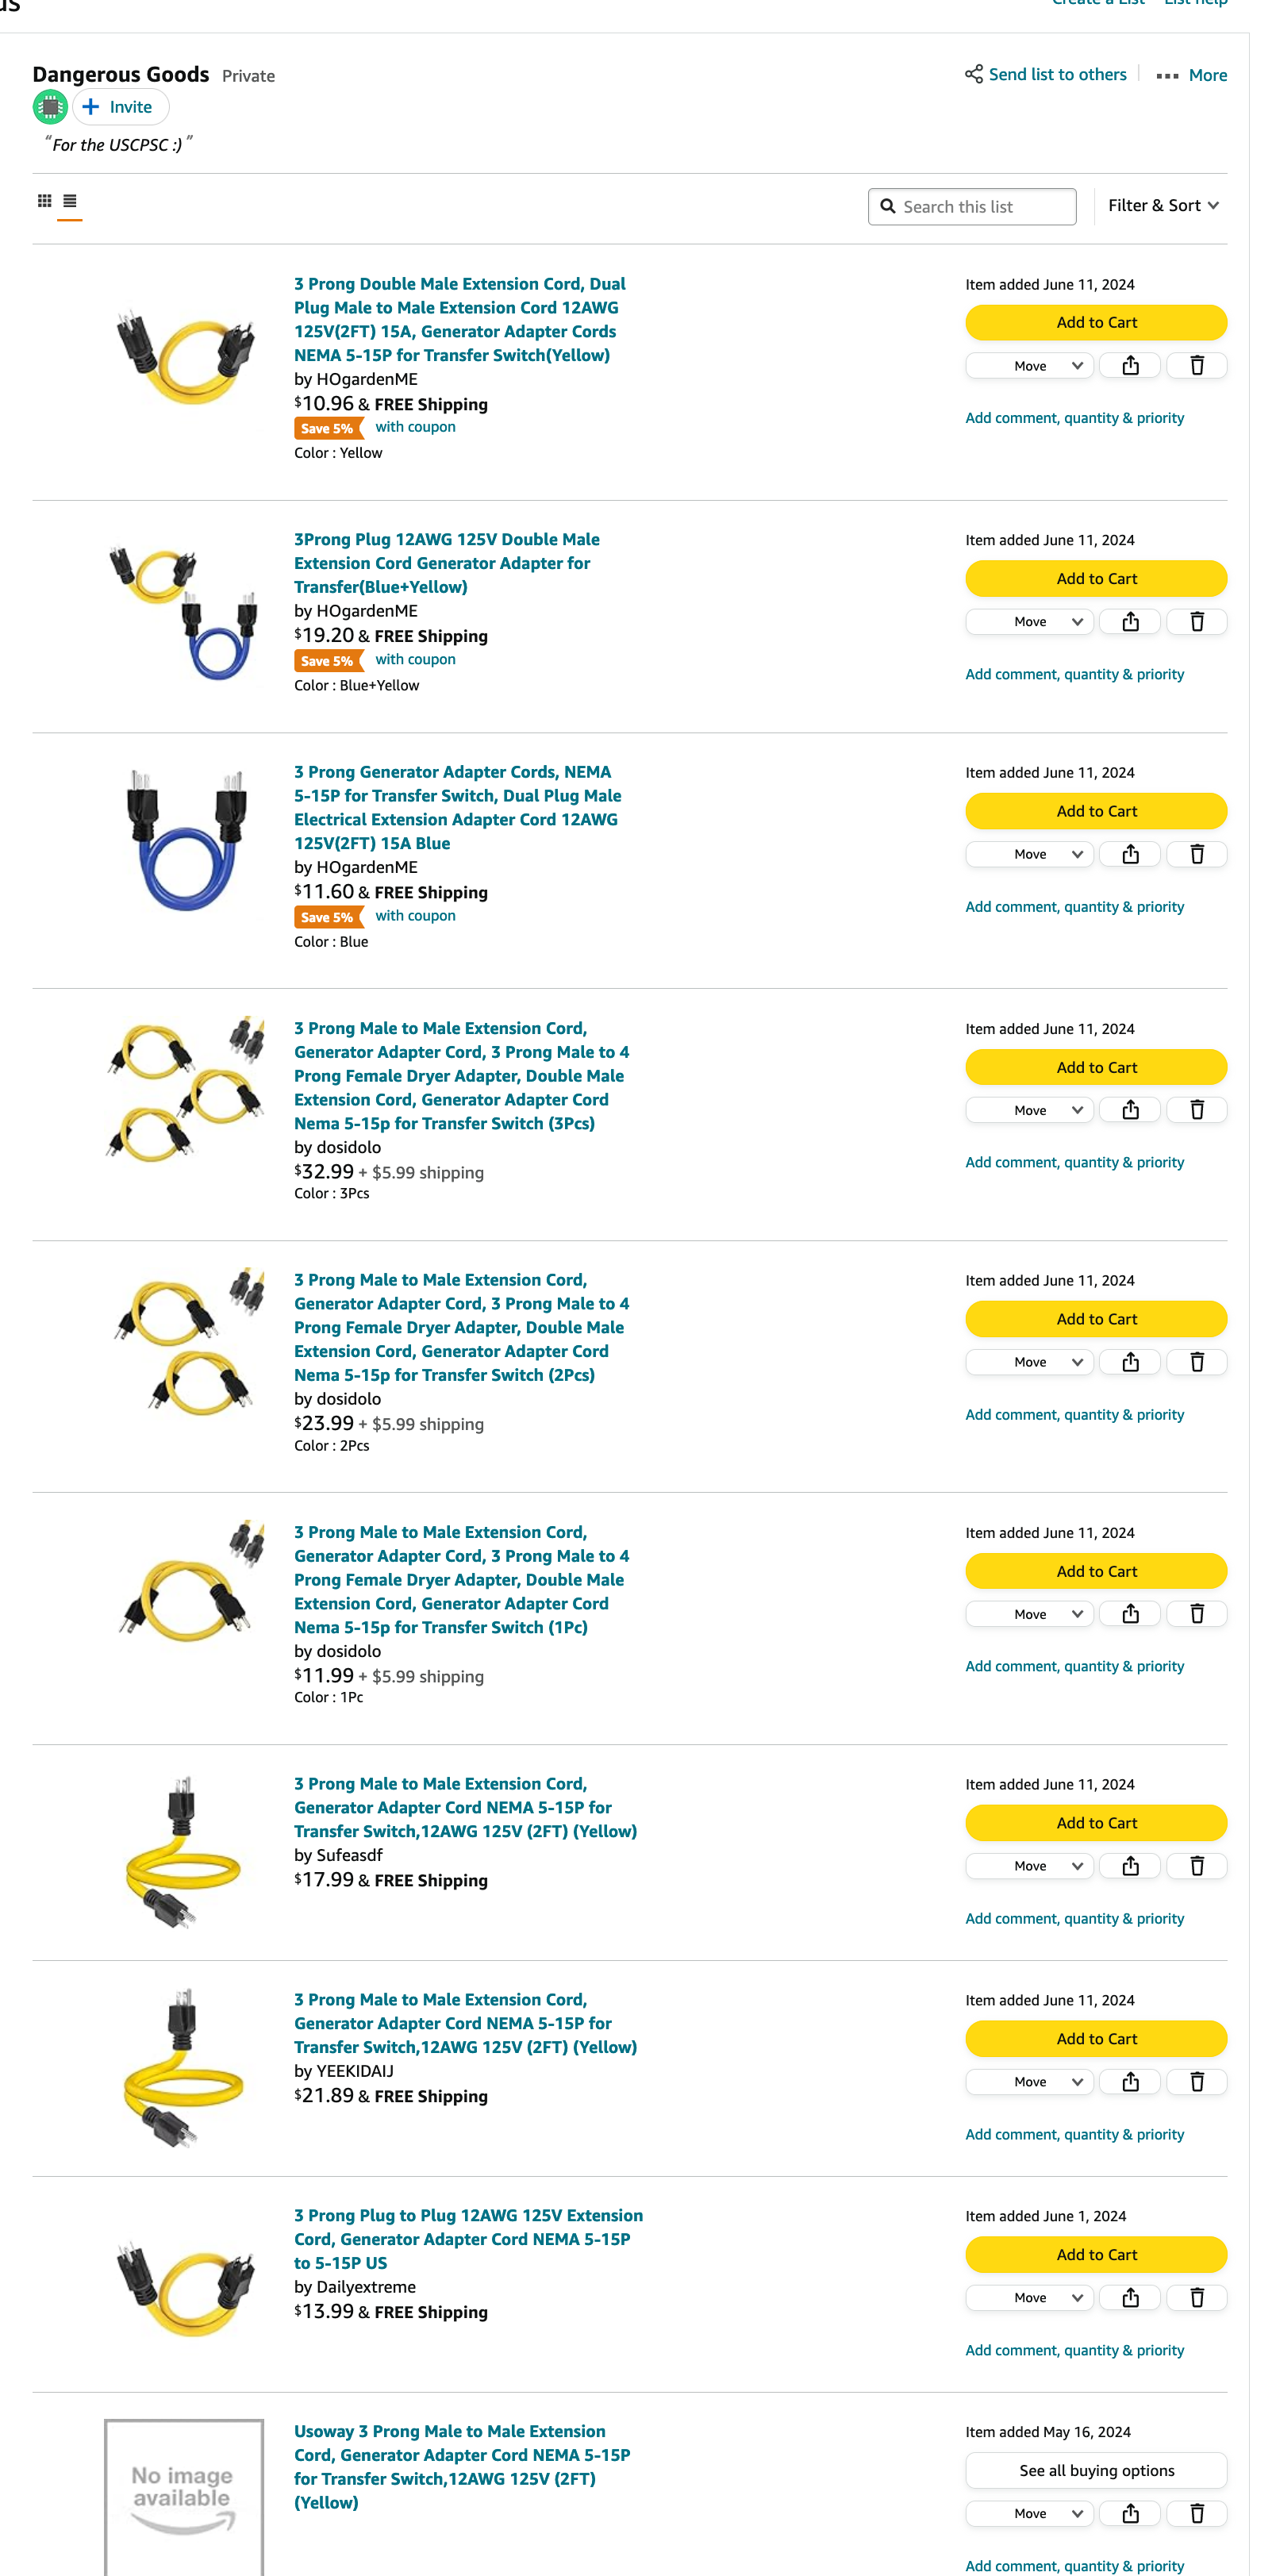 screenshot of amazon shopping list titled "dangerous goods", with 10 suicide cords and 9 available for purchase